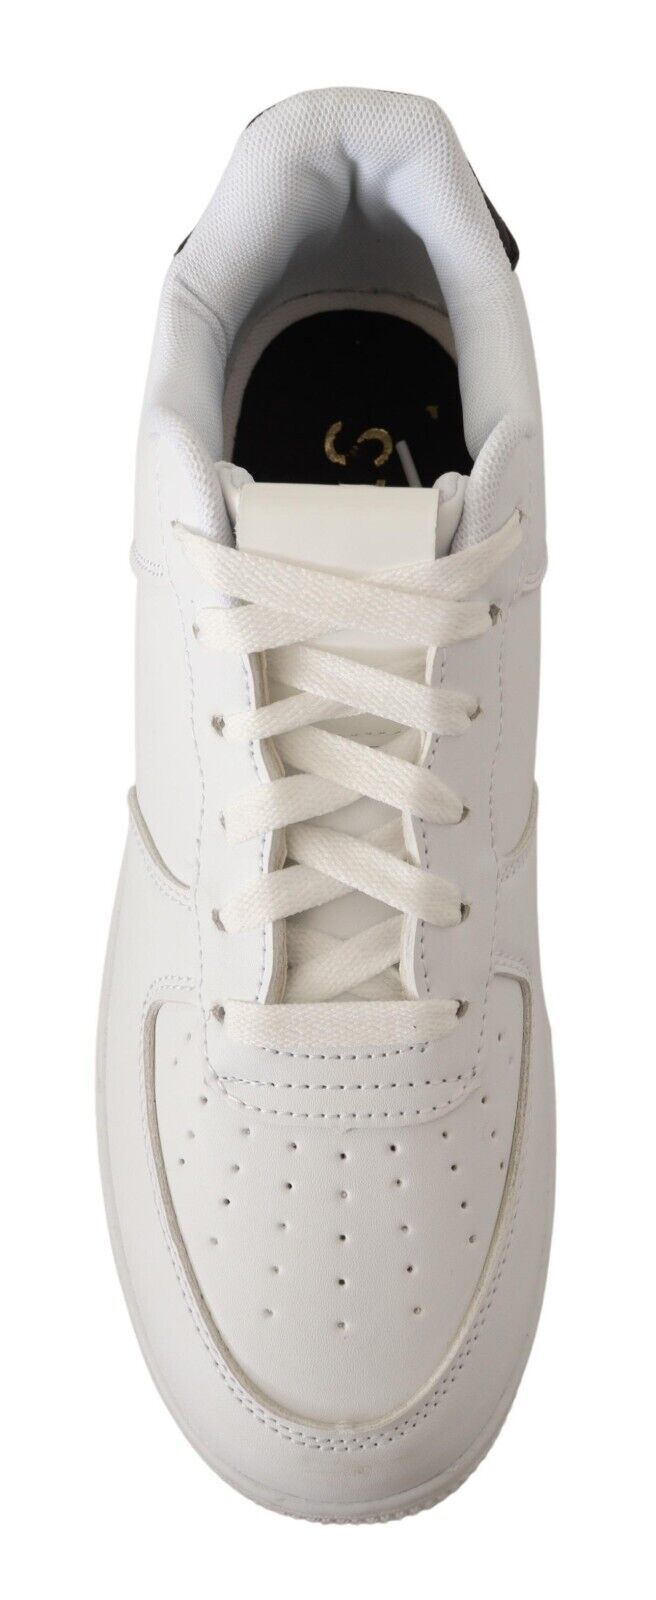 SIGNS White Leather Perforated Lace Up Sneakers Casual Men Shoes | Fashionsarah.com